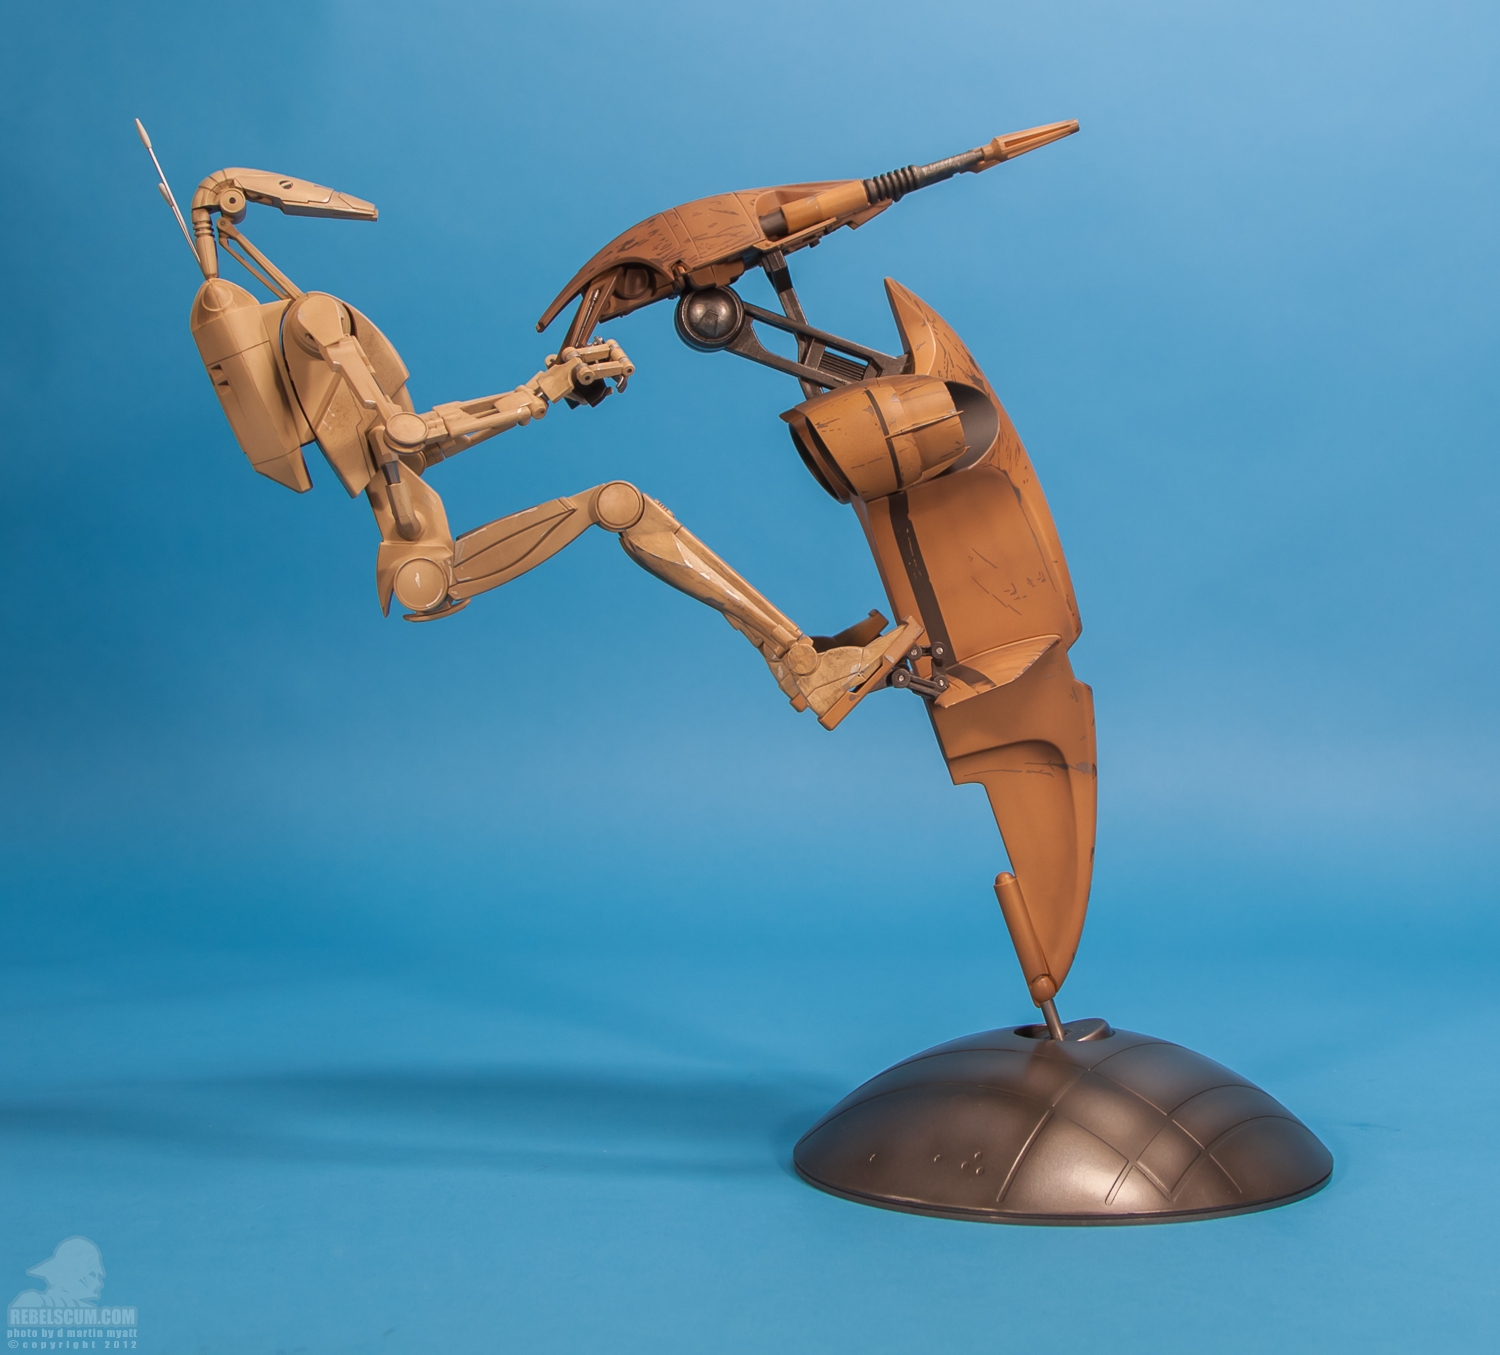 STAP_Battle_Droid_Star_Wars_Sideshow_Collectibles-38.jpg